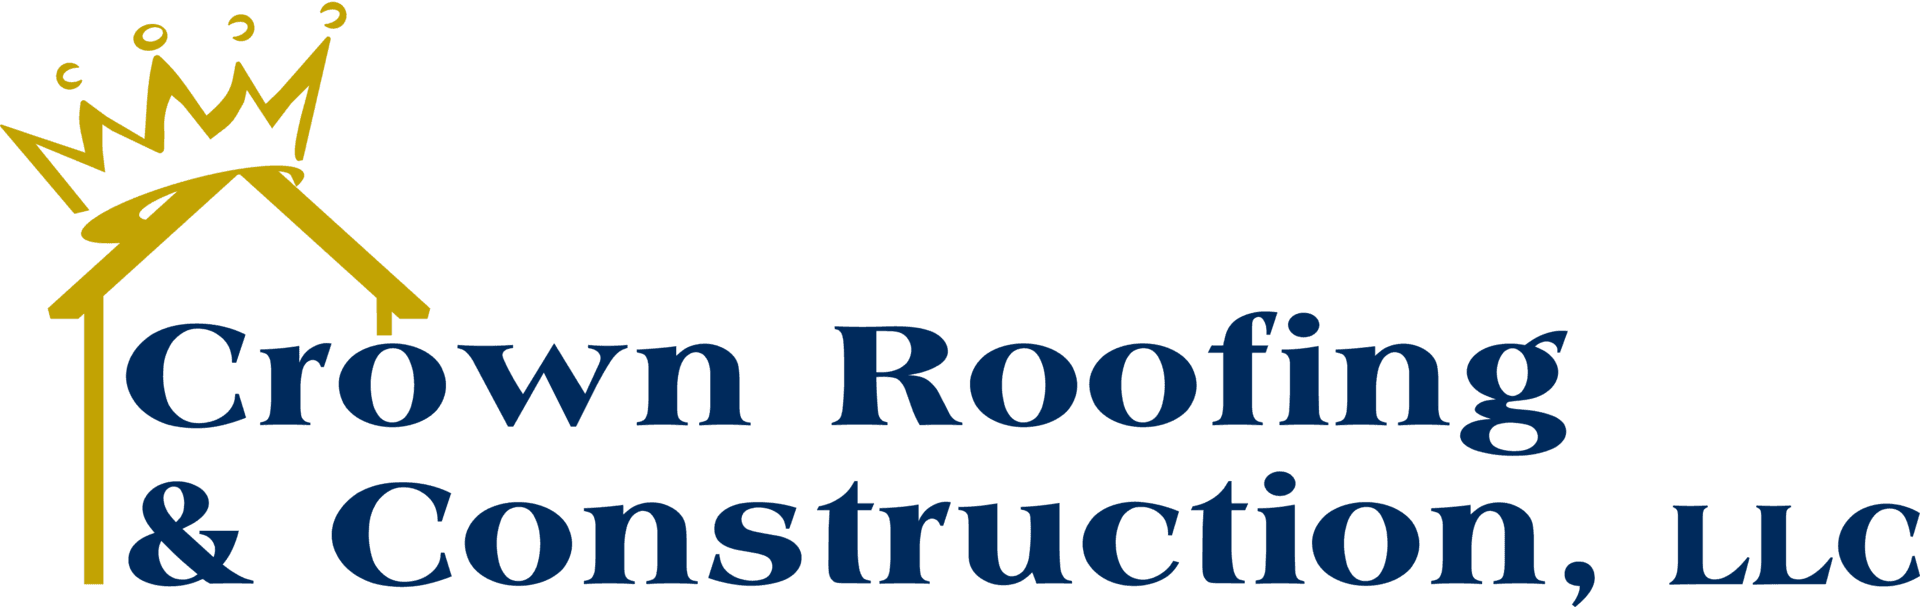 Crown Roofing & Construction logo